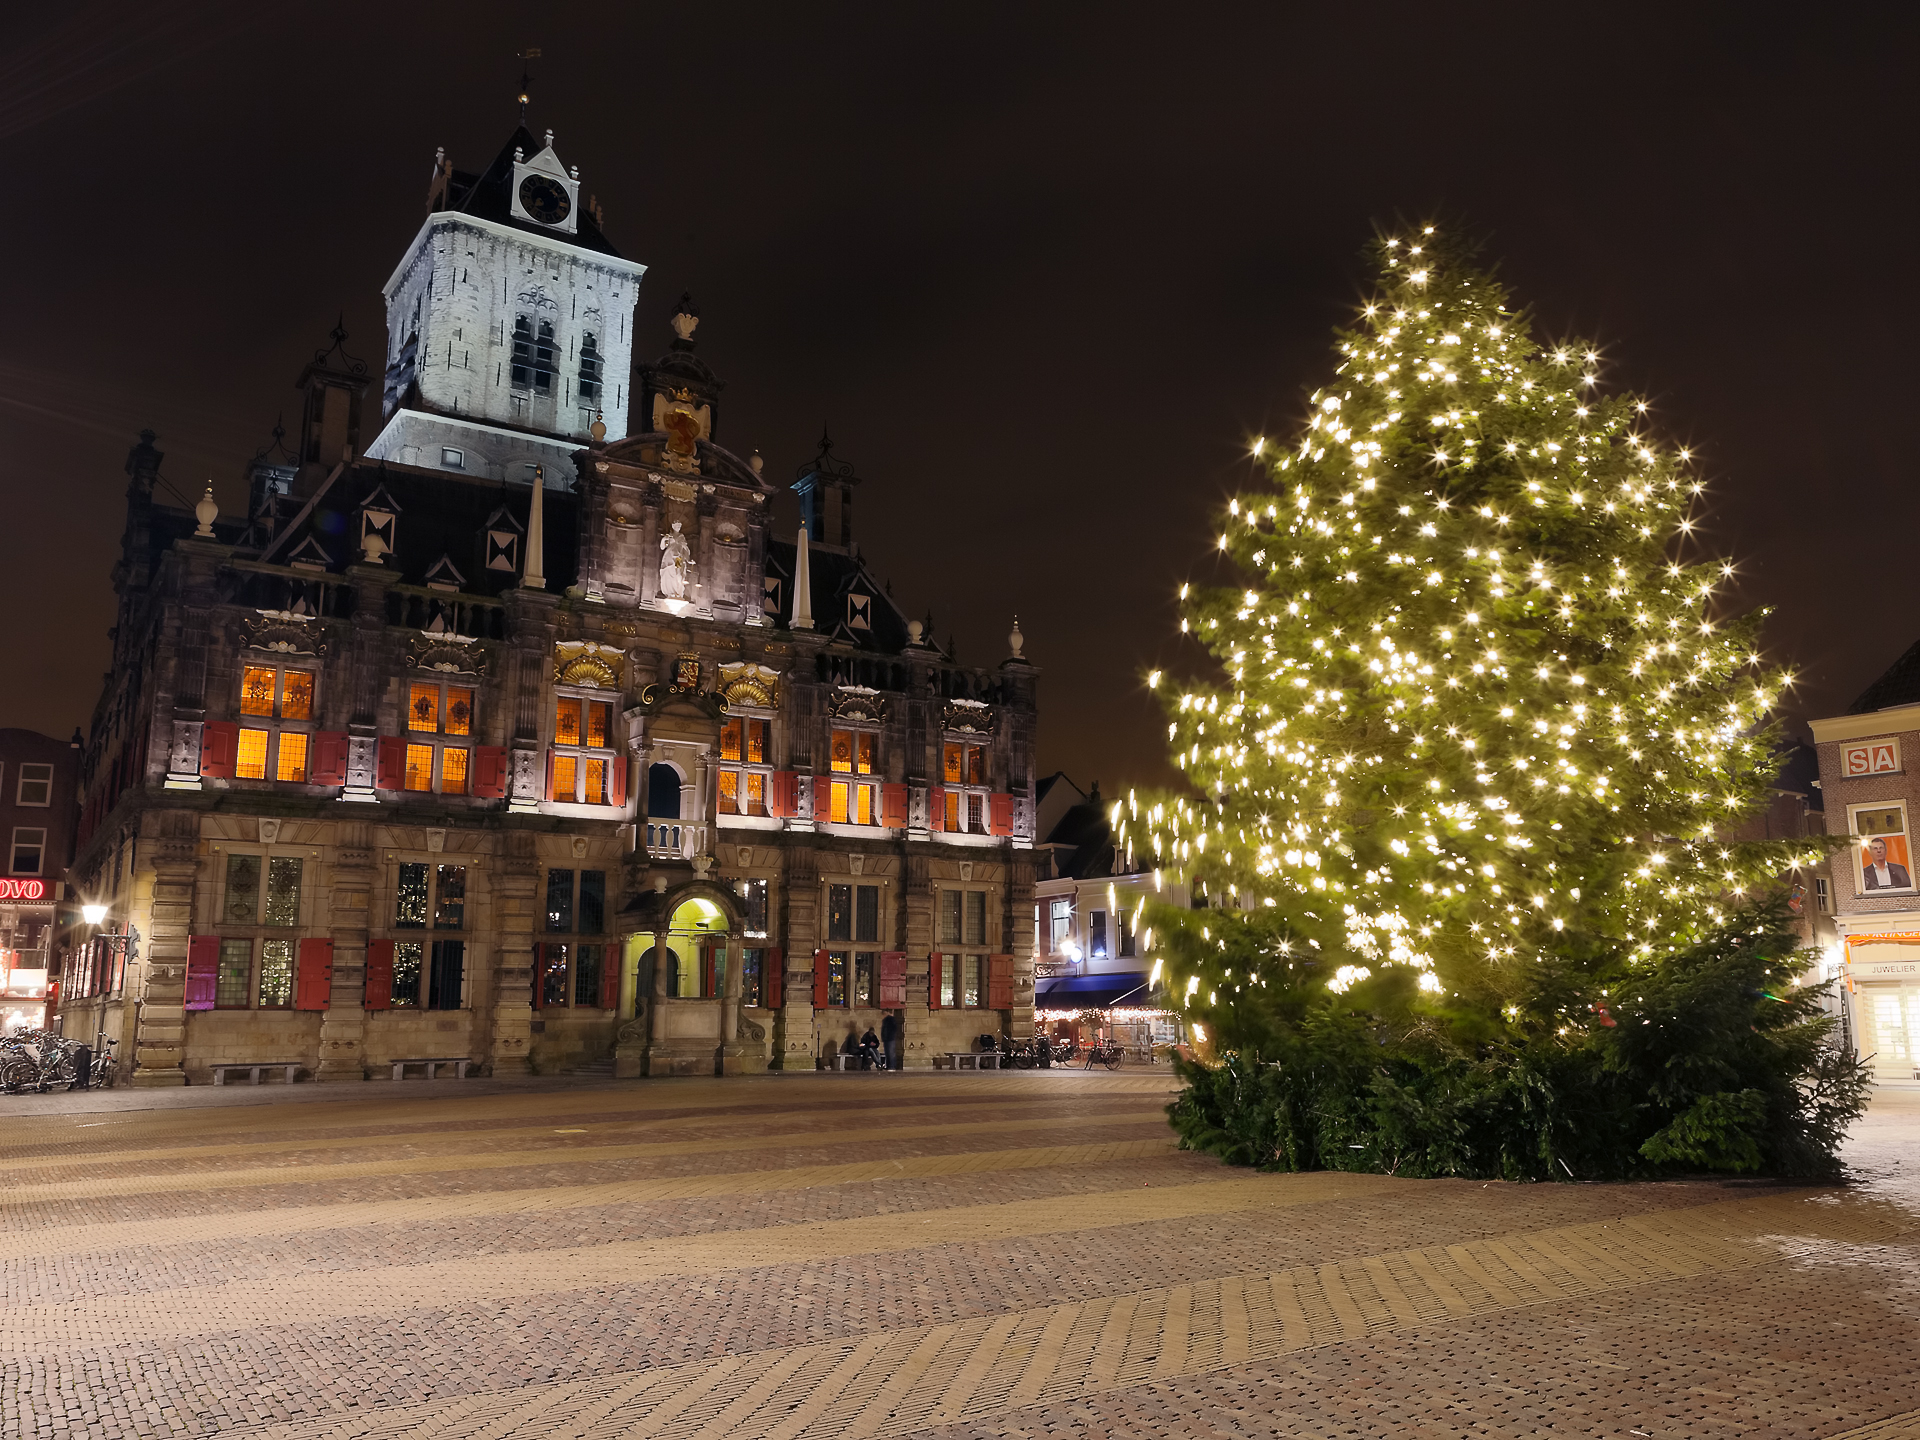 Merry Christmas from Delft...